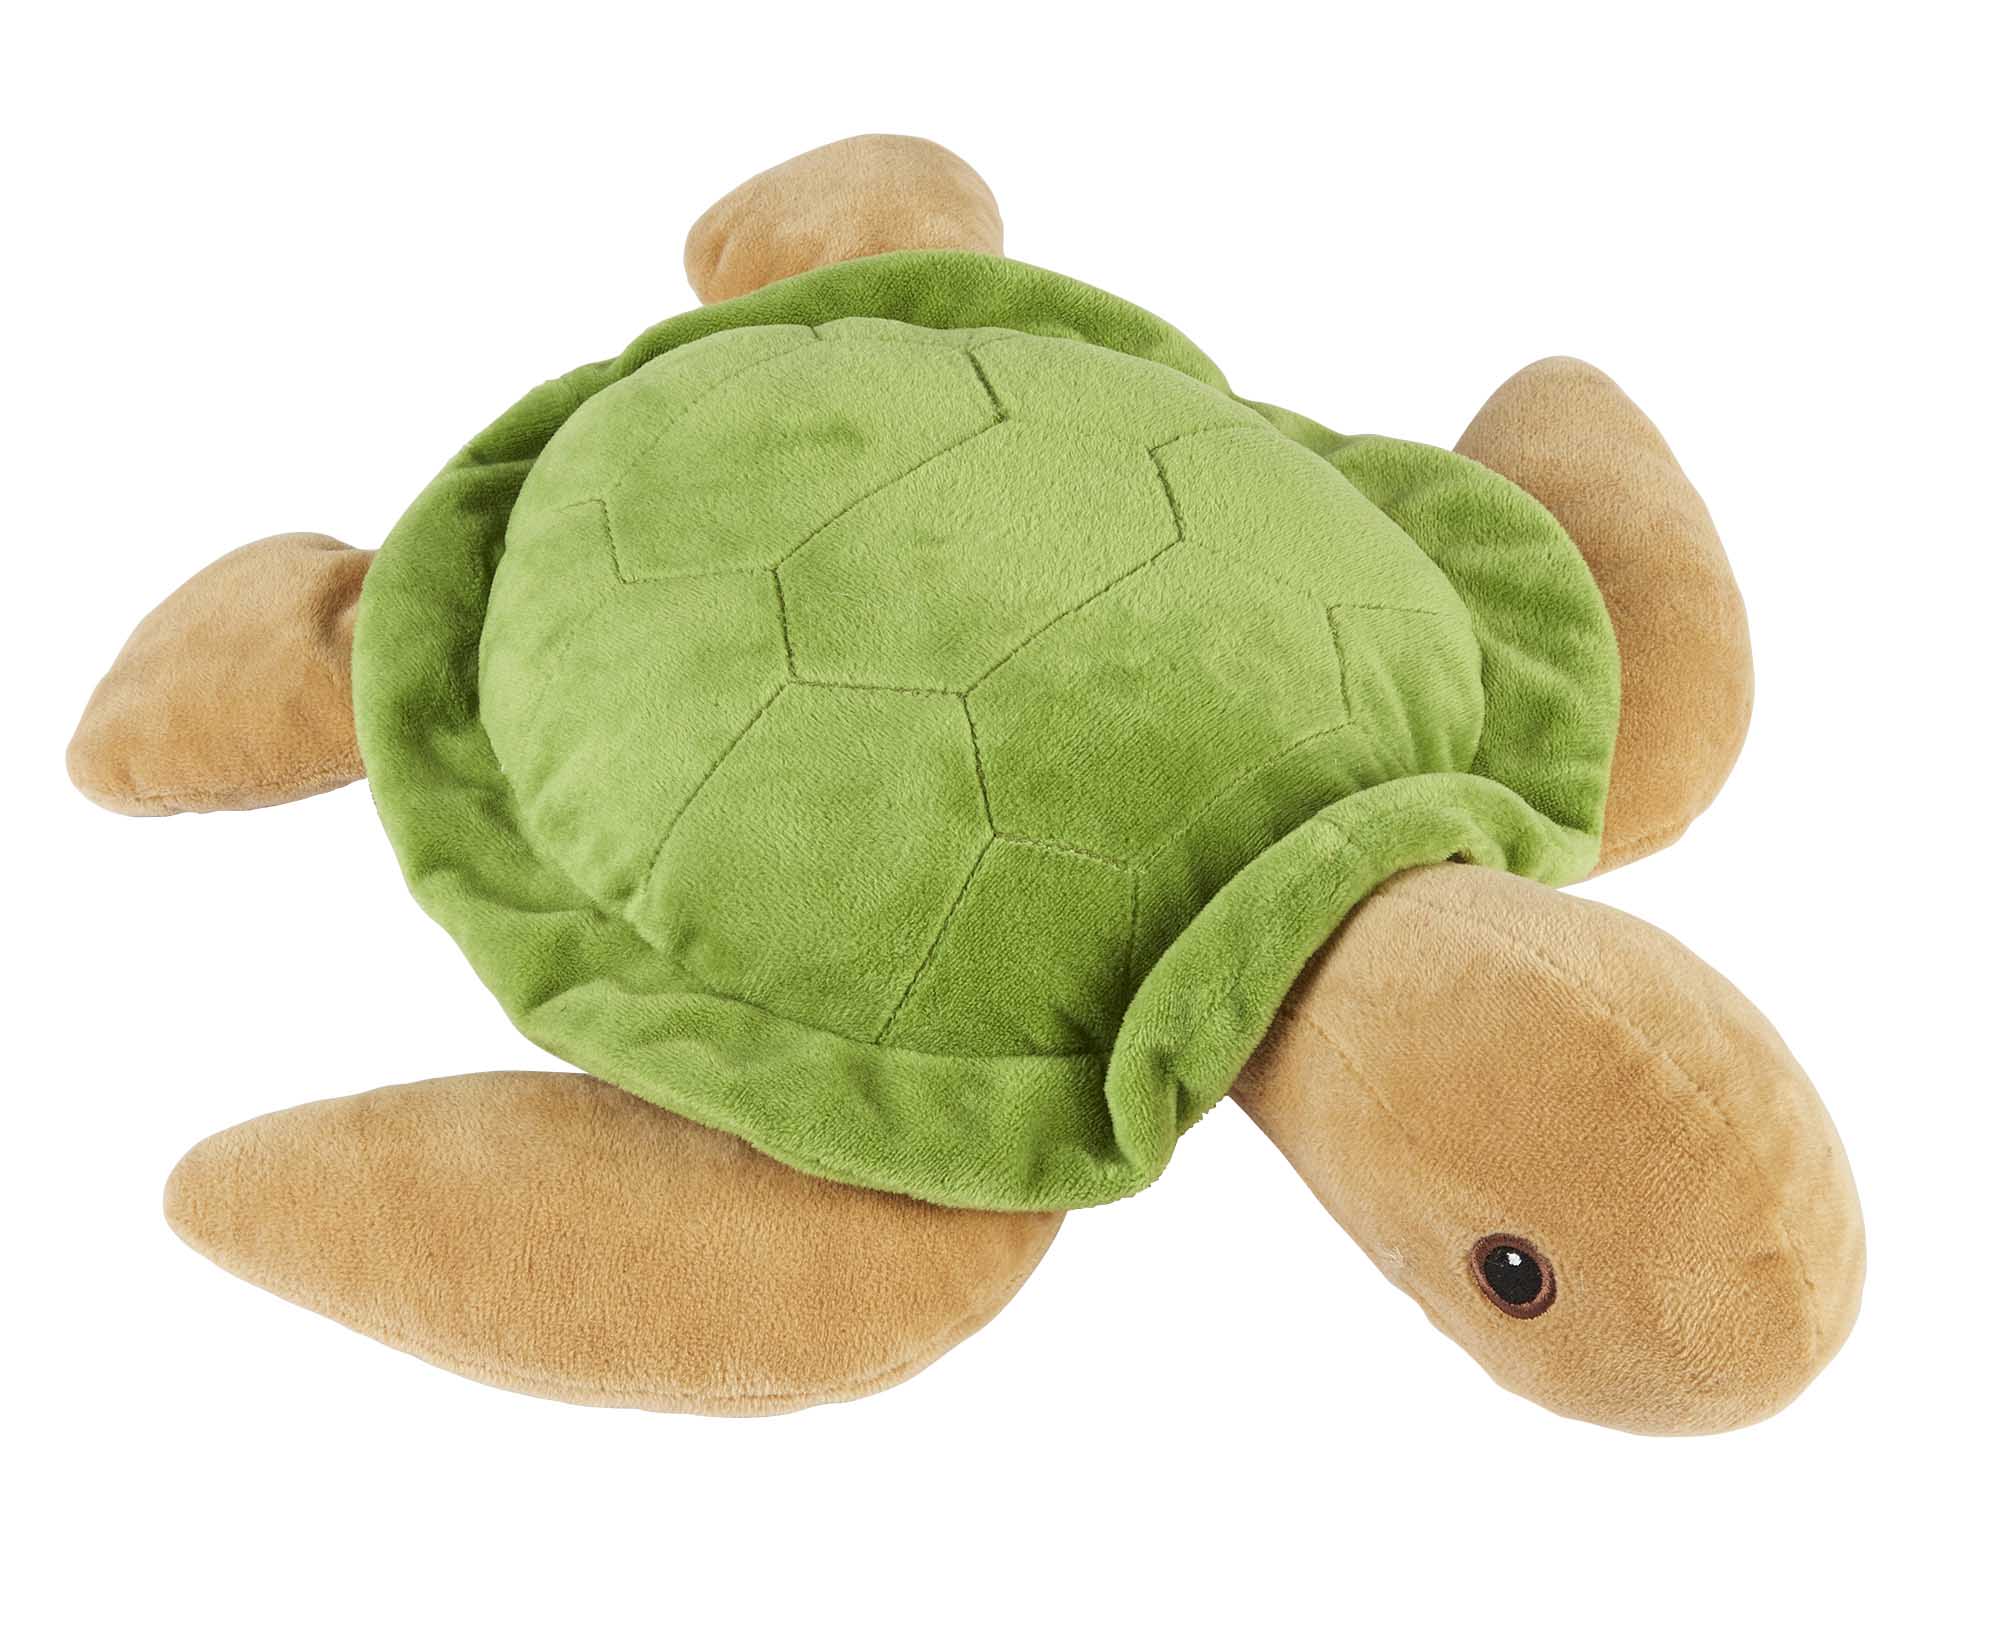 Toy Sea Turtle For Theme Parks